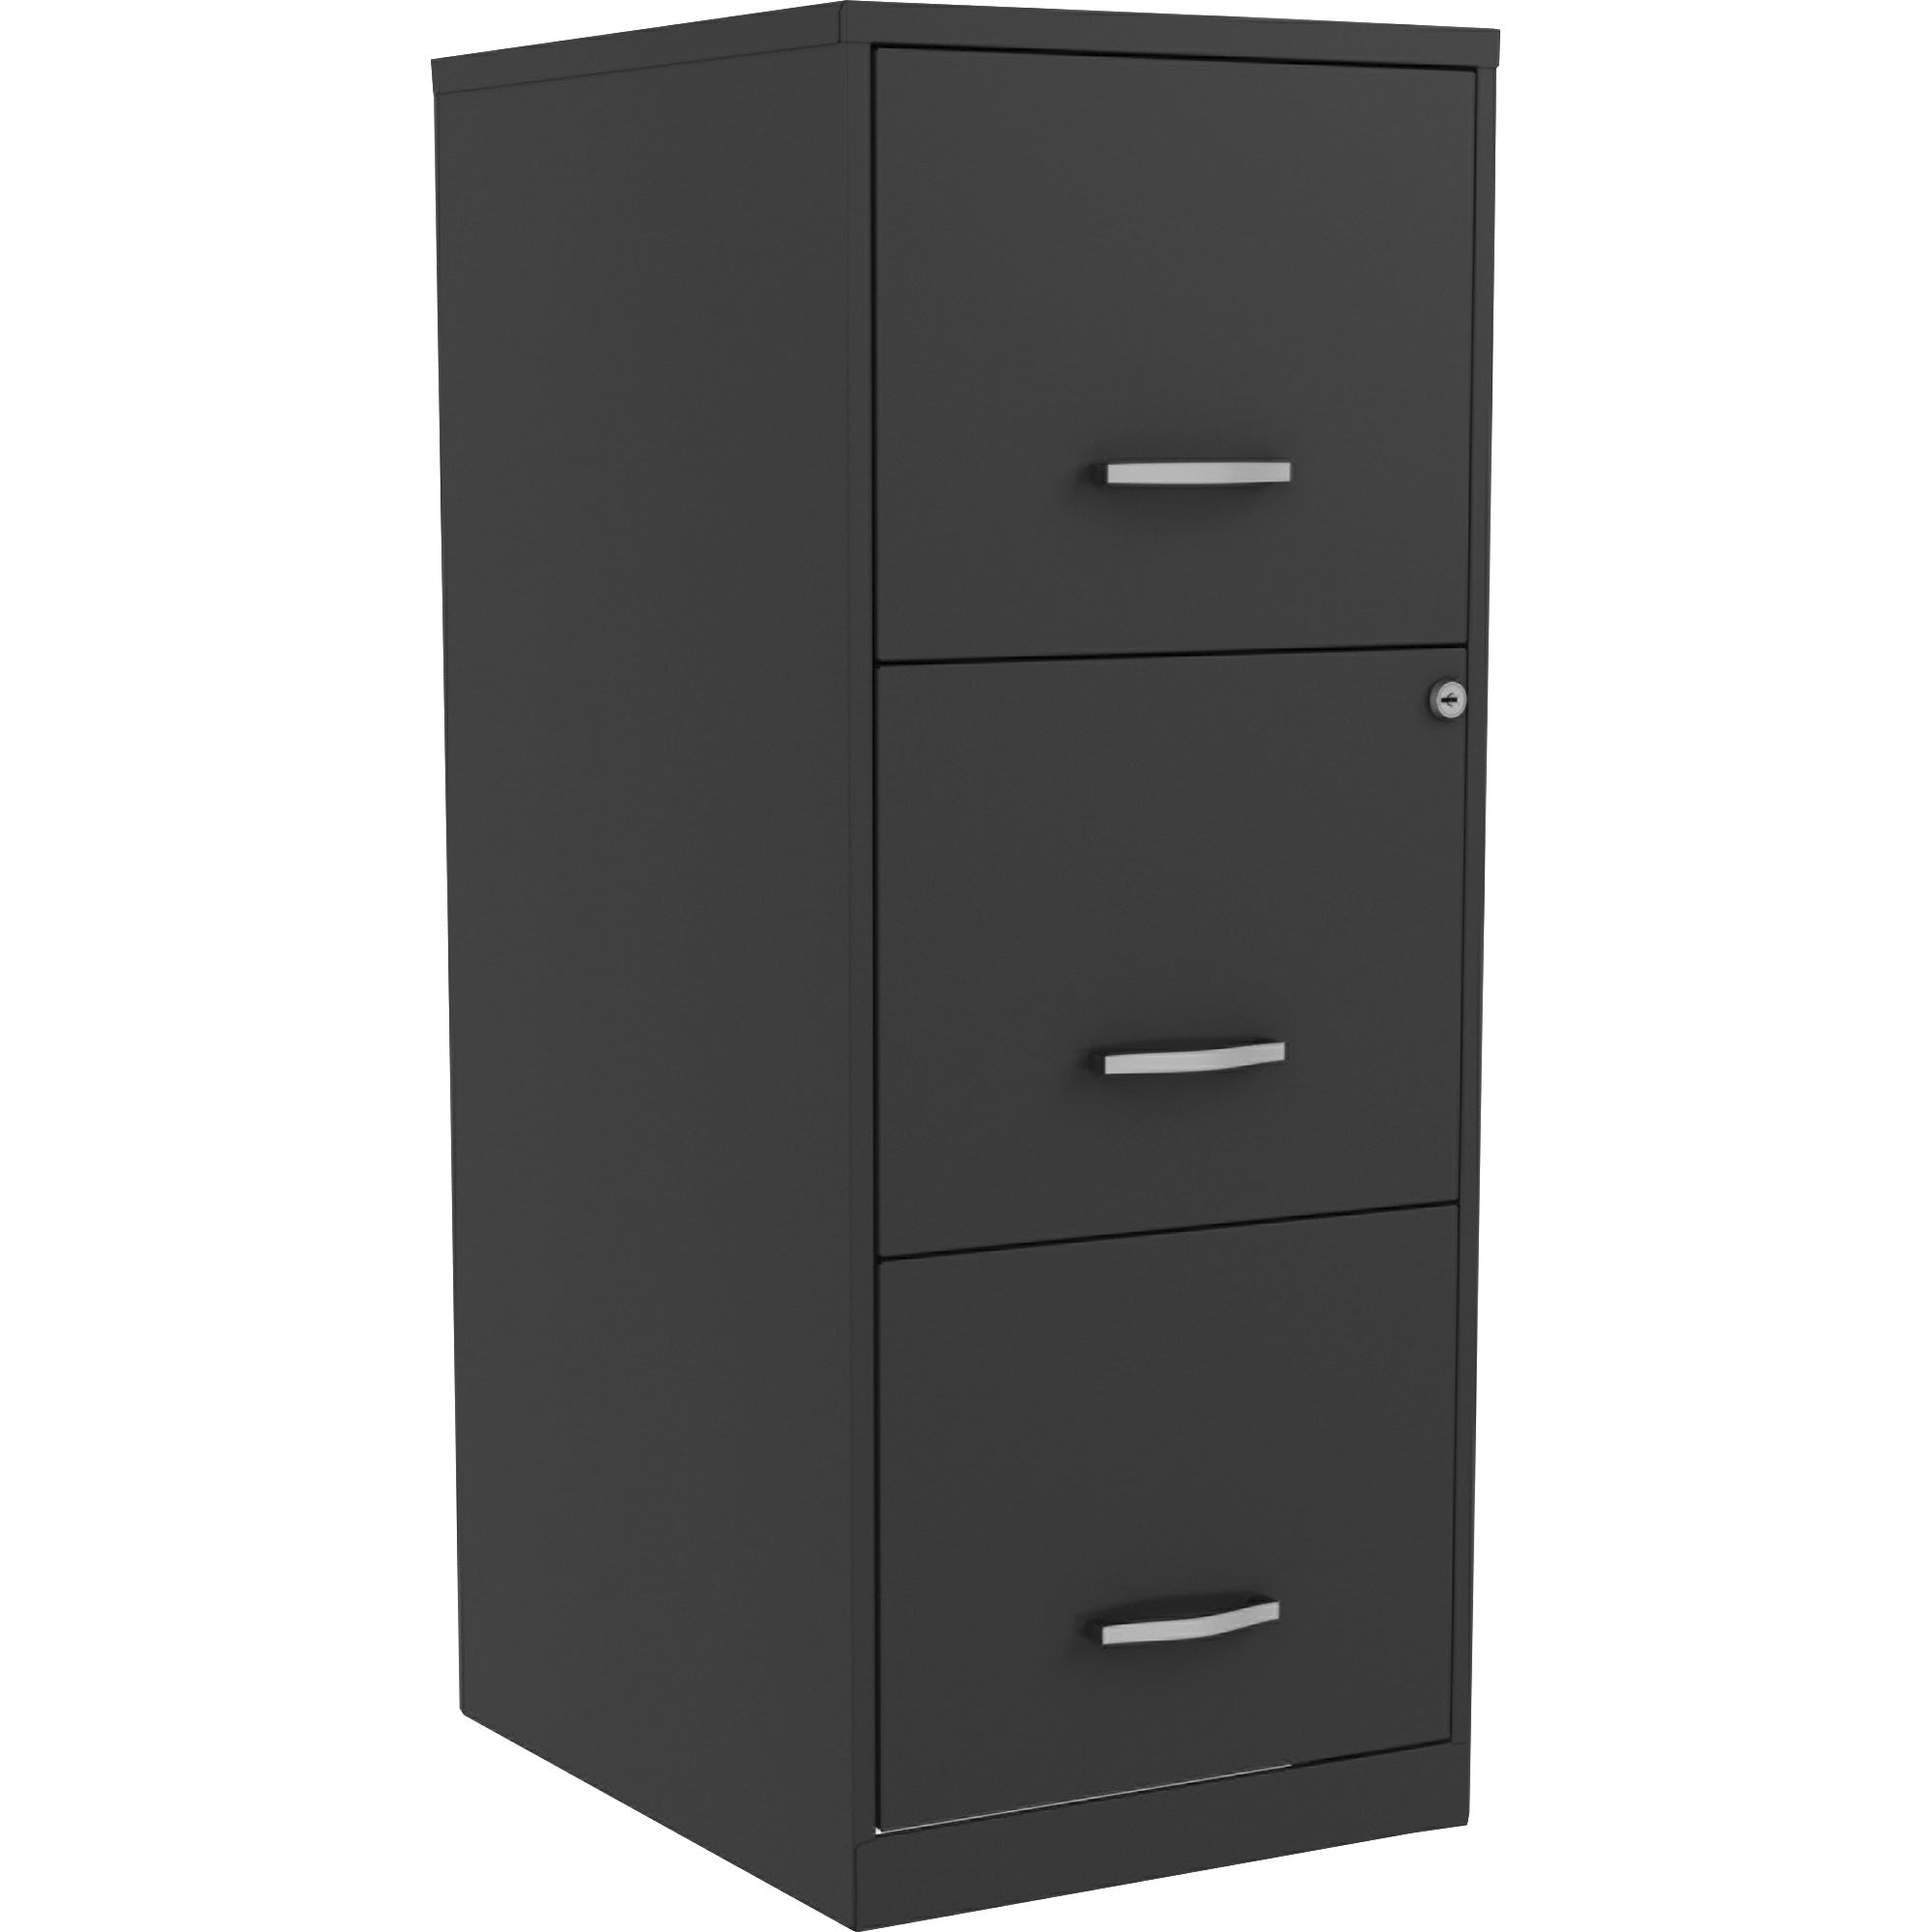 nusparc-vertical-file-cabinet-142-x-18-x-355-3-x-drawers-for-file-letter-vertical-cam-lock-glide-suspension-anti-tip-nonporous-surface-3-4-drawer-extension-black-baked-enamel-metal-recycled_nprvf318ffbk - 1